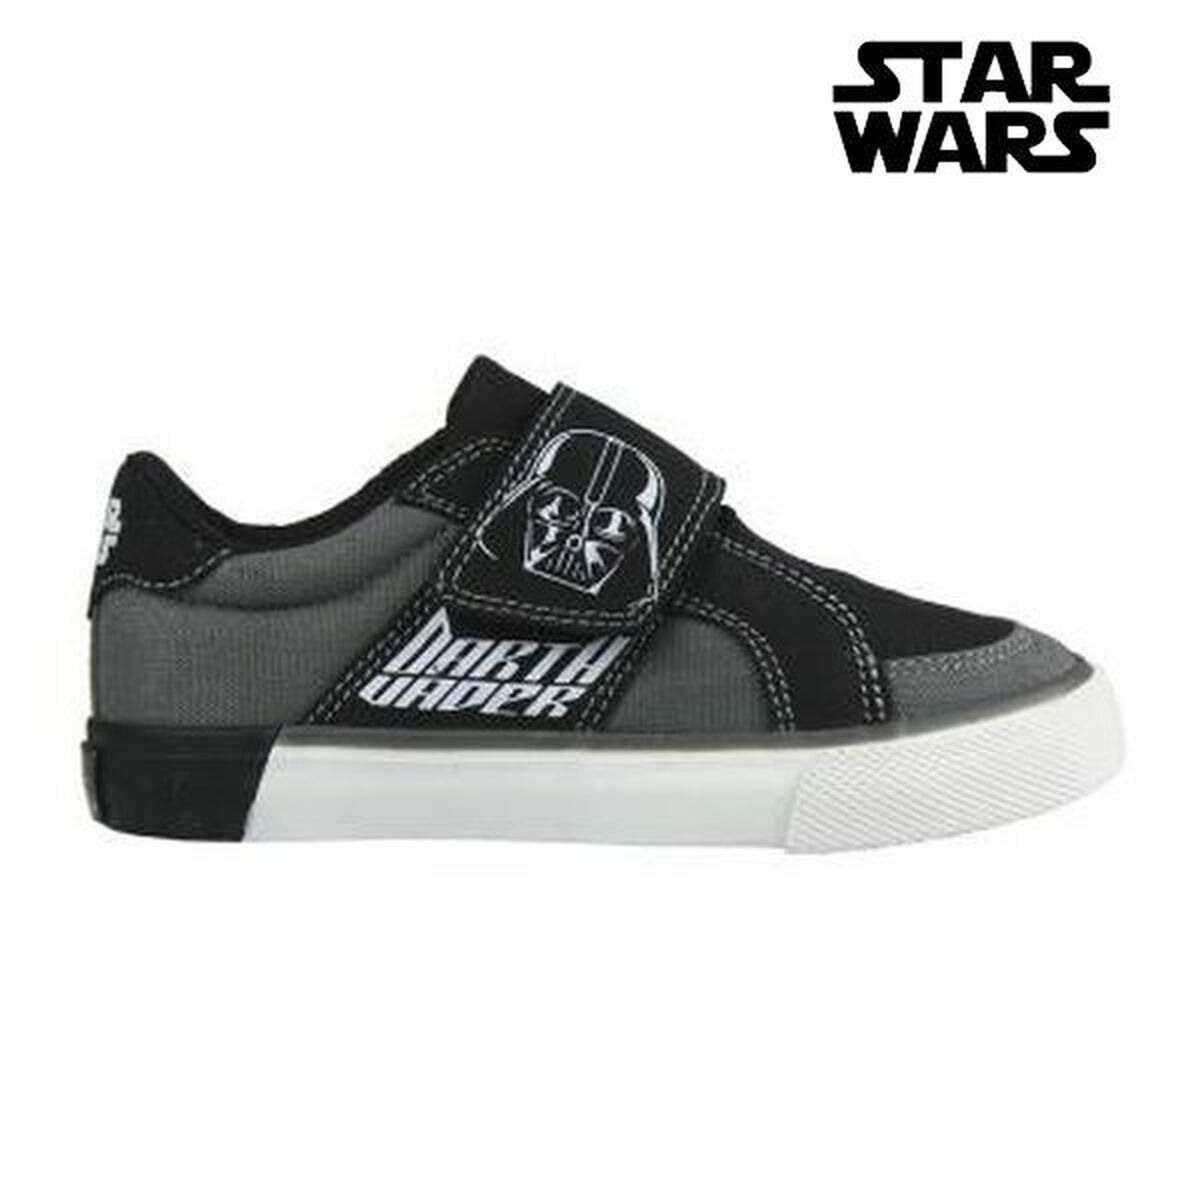 Chaussures casual Star Wars 4806 (taille 27)